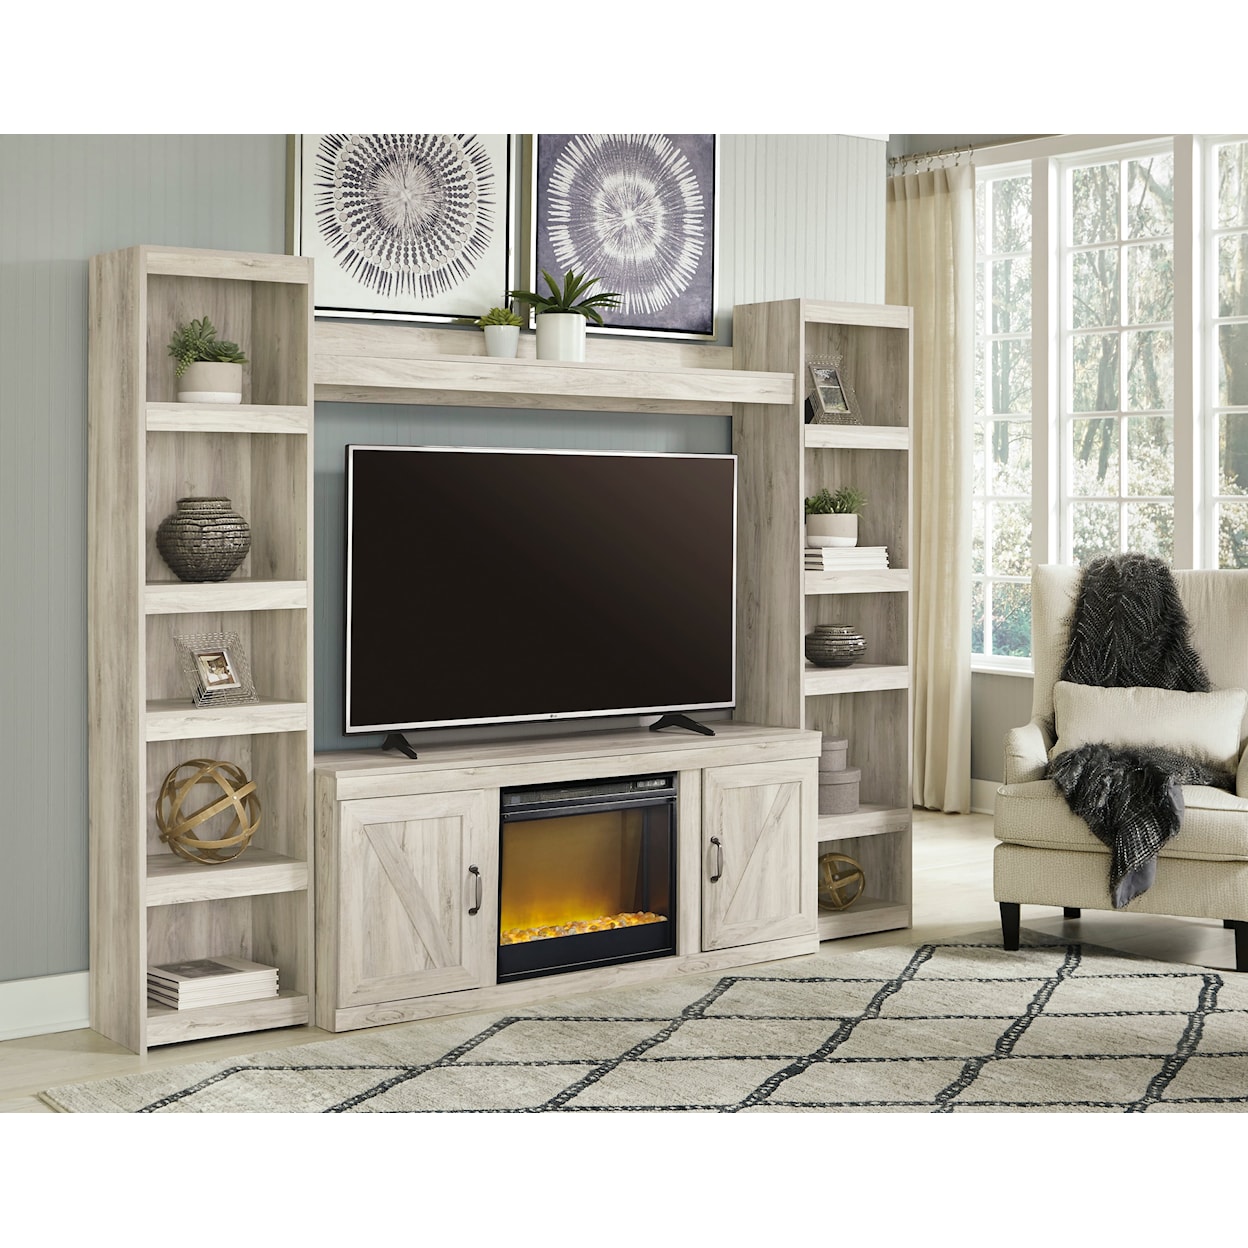 Signature Design by Ashley Bellaby Entertainment Center with Fireplace